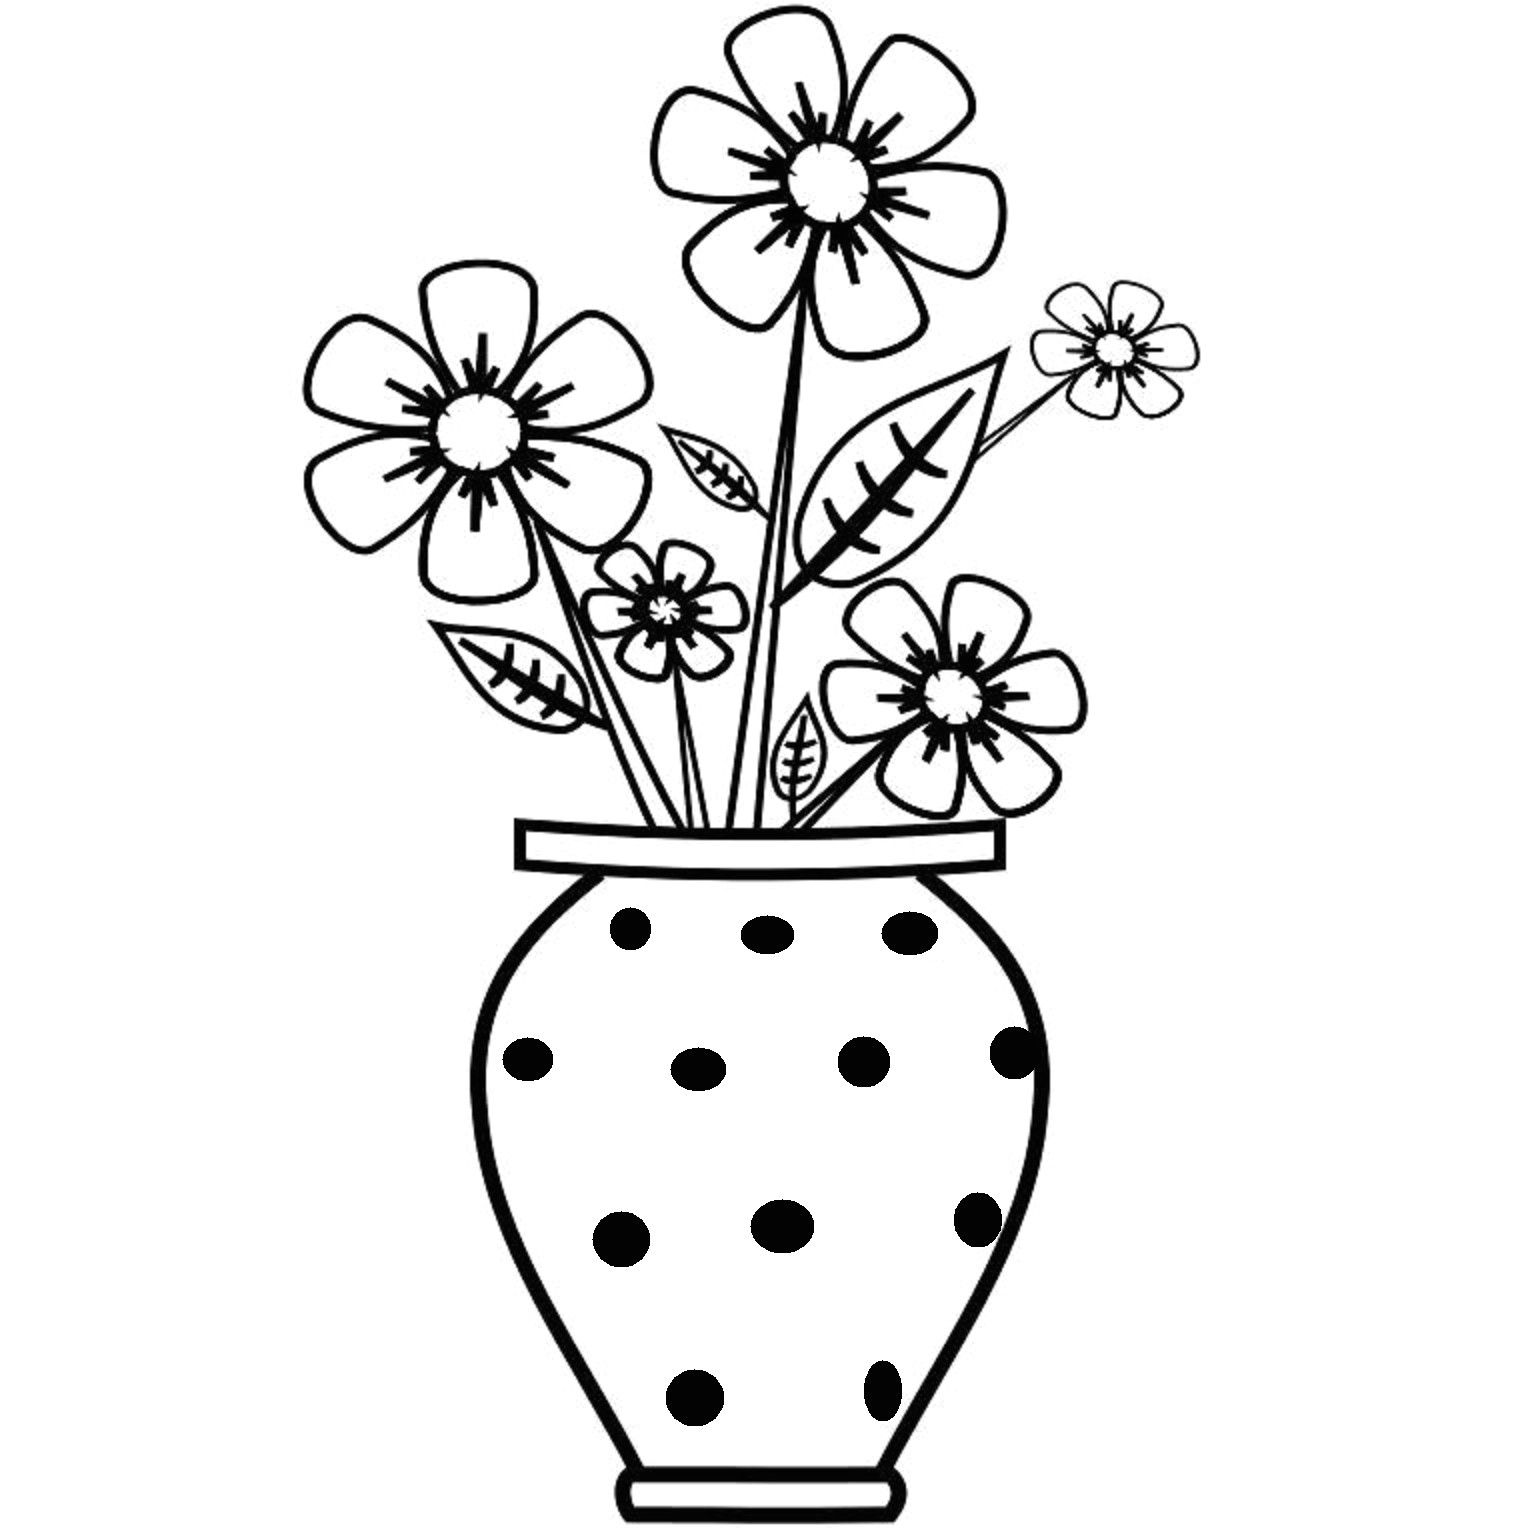 Drawings Of Flowers In Pots Flowers to Draw Easy Step by Step Flower Pot for Drawing Sketches